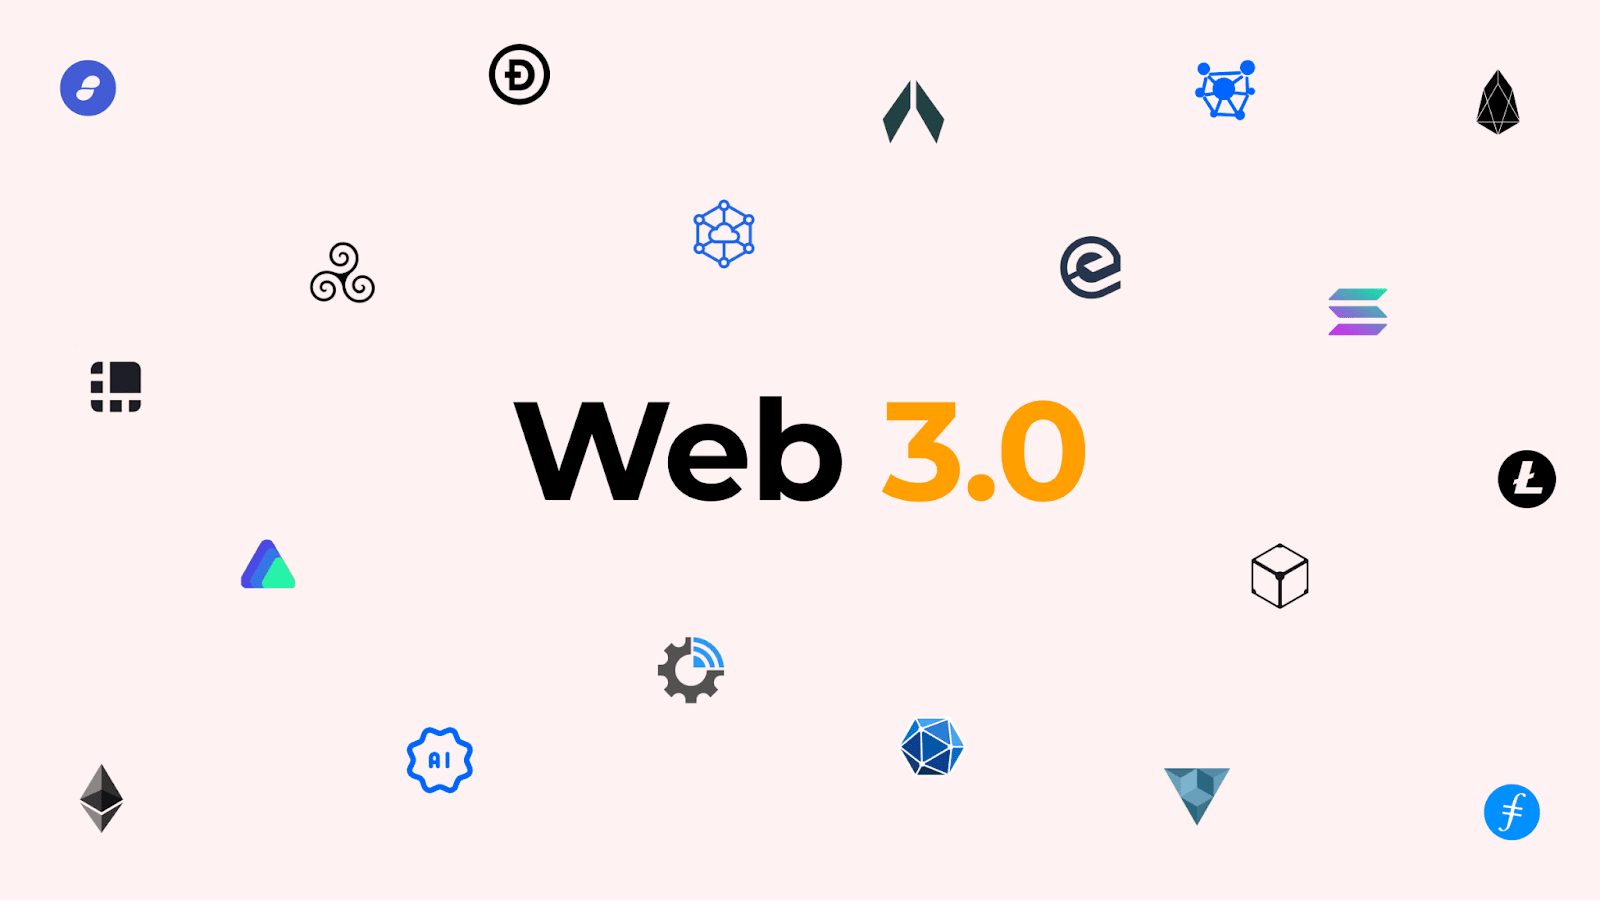 Web 3.0 and dApp examples